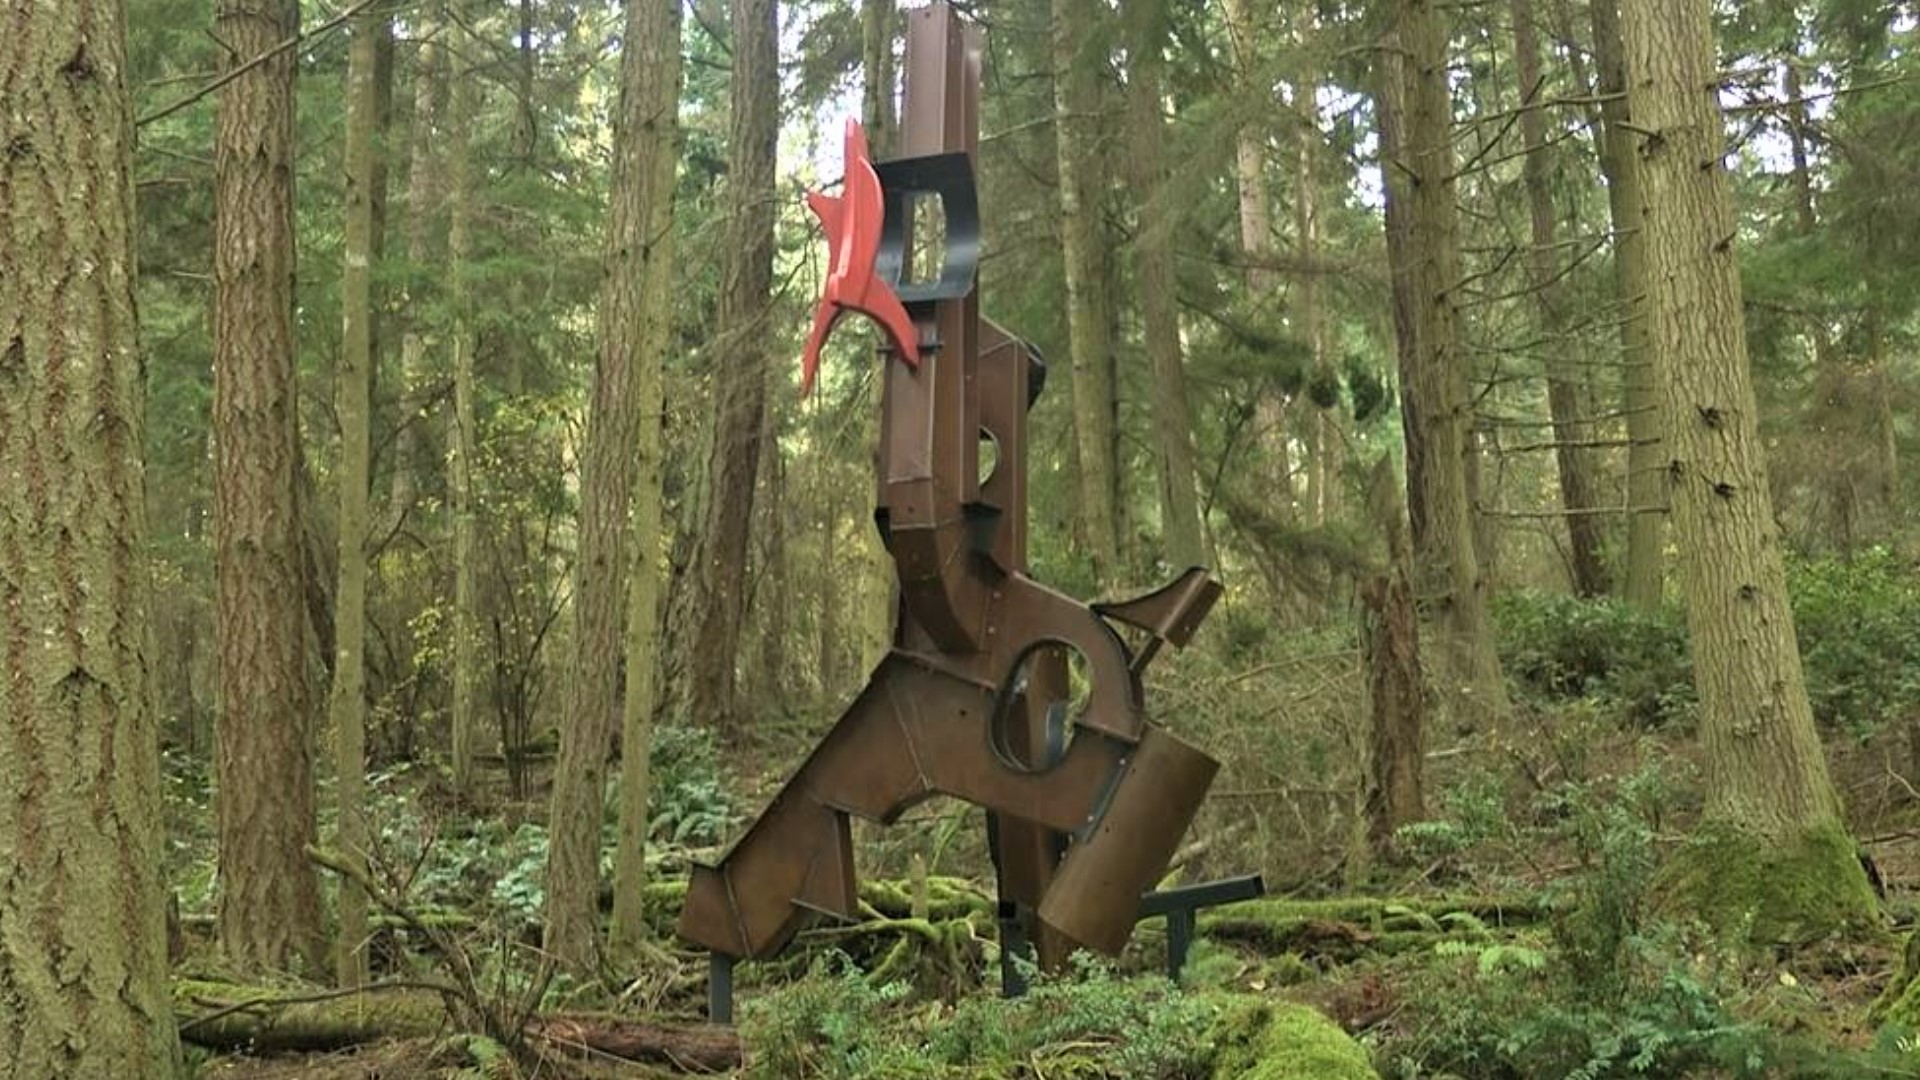 The Price Sculpture Forest is free to the public